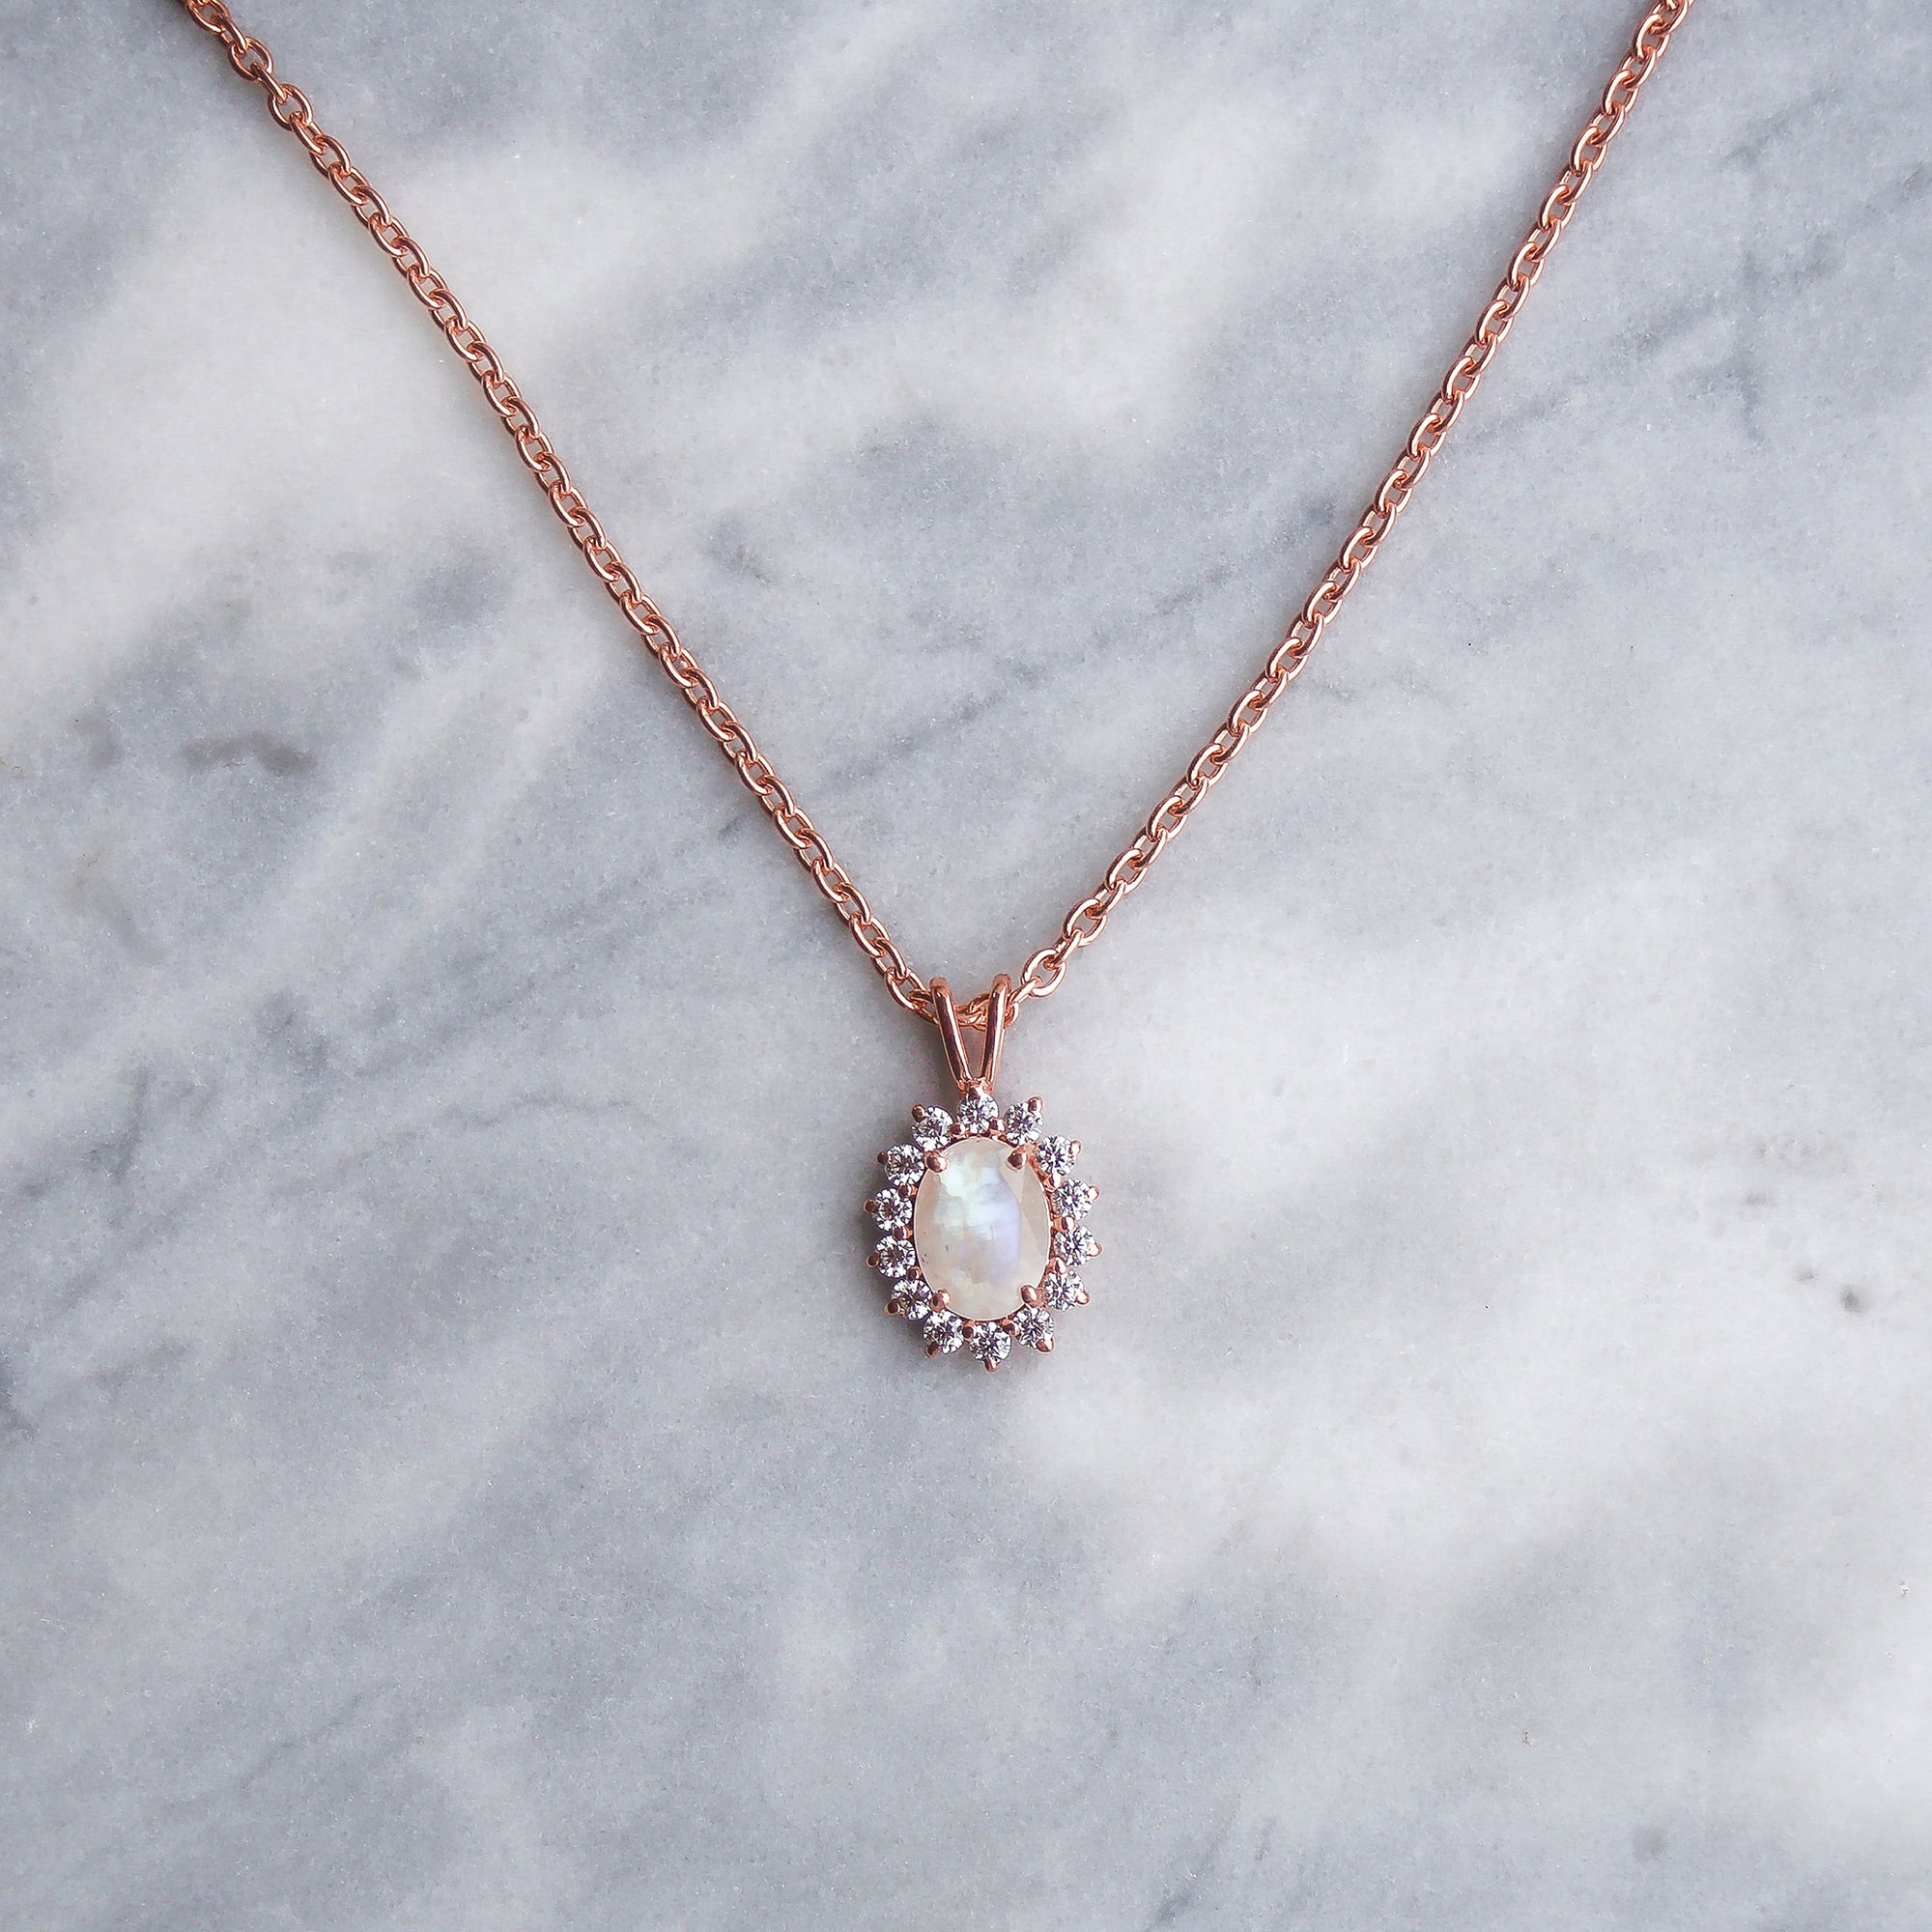 Pearl and Moonstone Necklace - ApolloBox